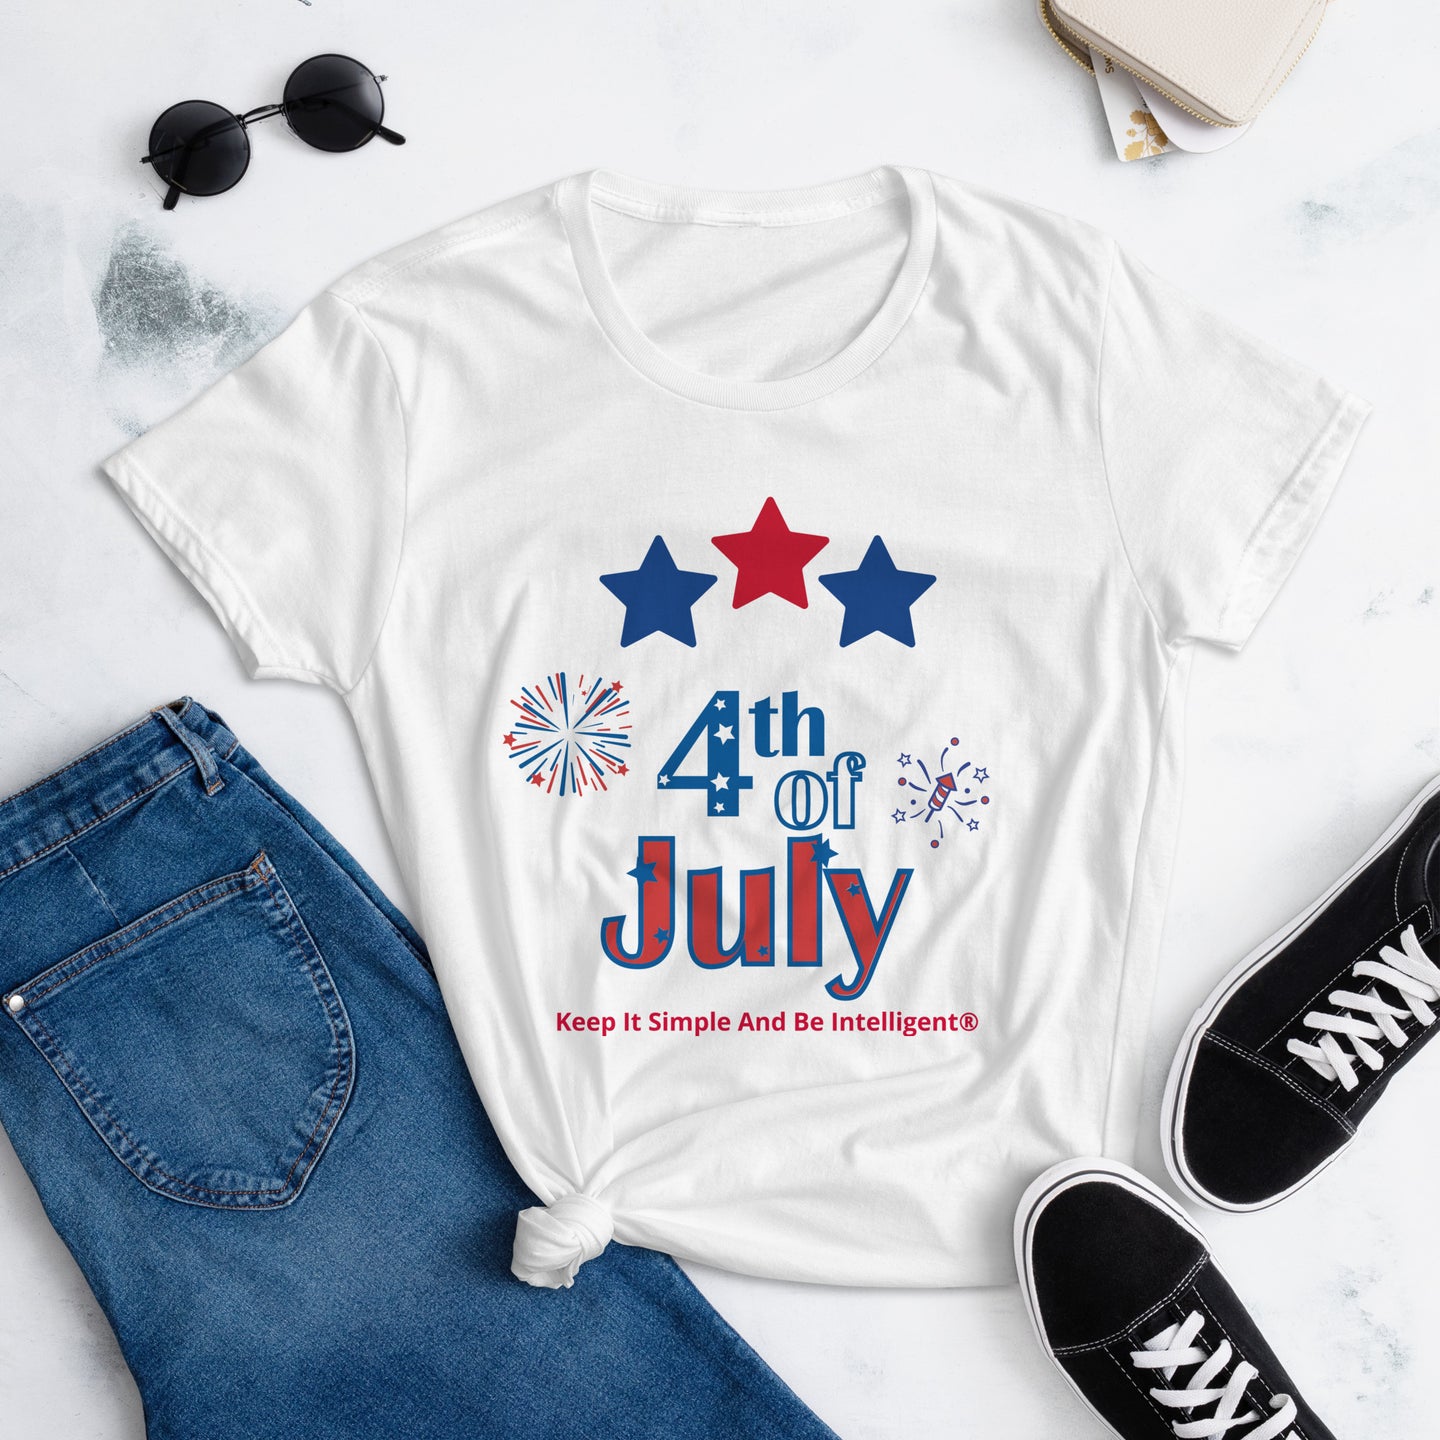 4th of July Women's Short Sleeve T-Shirt By KISABI®